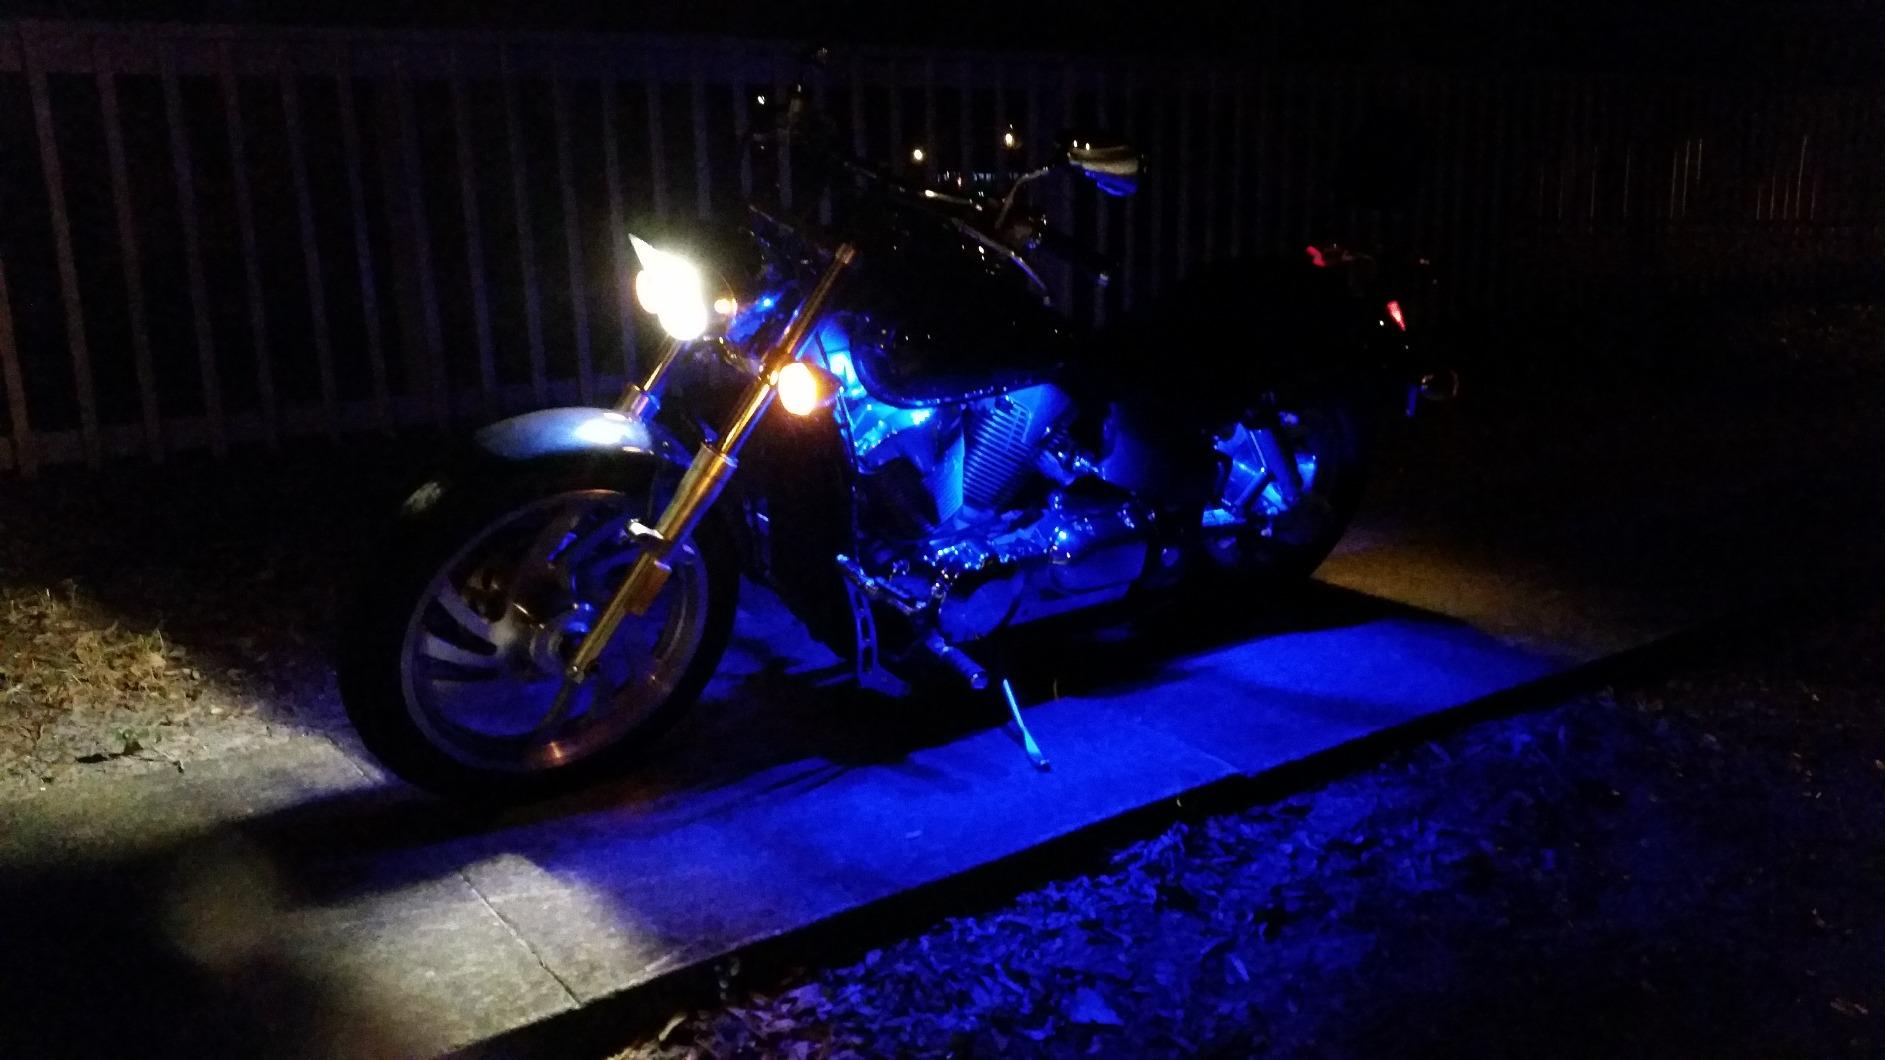 Brightest! RadLites 12 Piece Blue Motorcycle LED Light Kit with Remote and Effects 